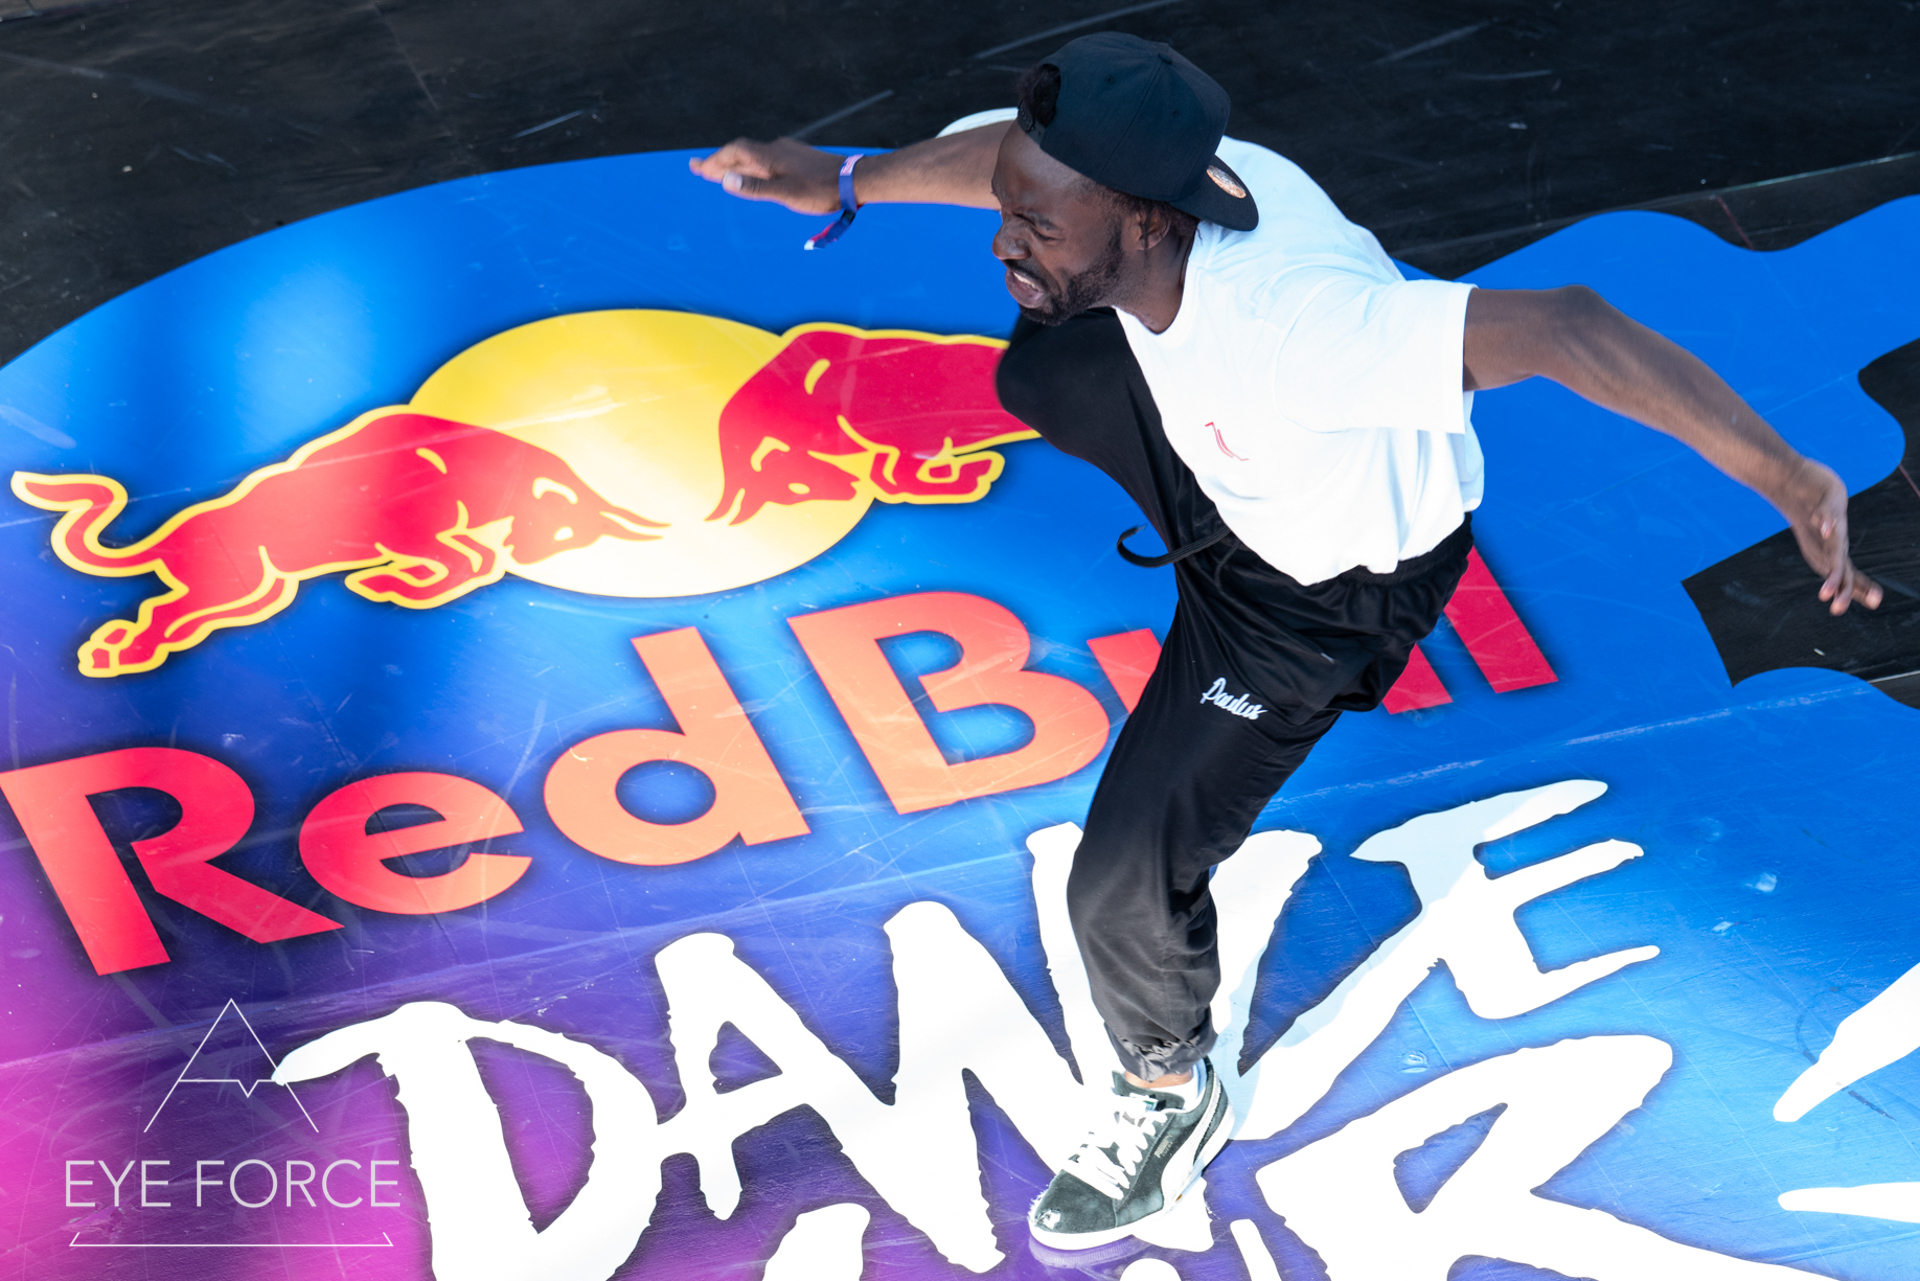 Red Bull - Dance your style 2019